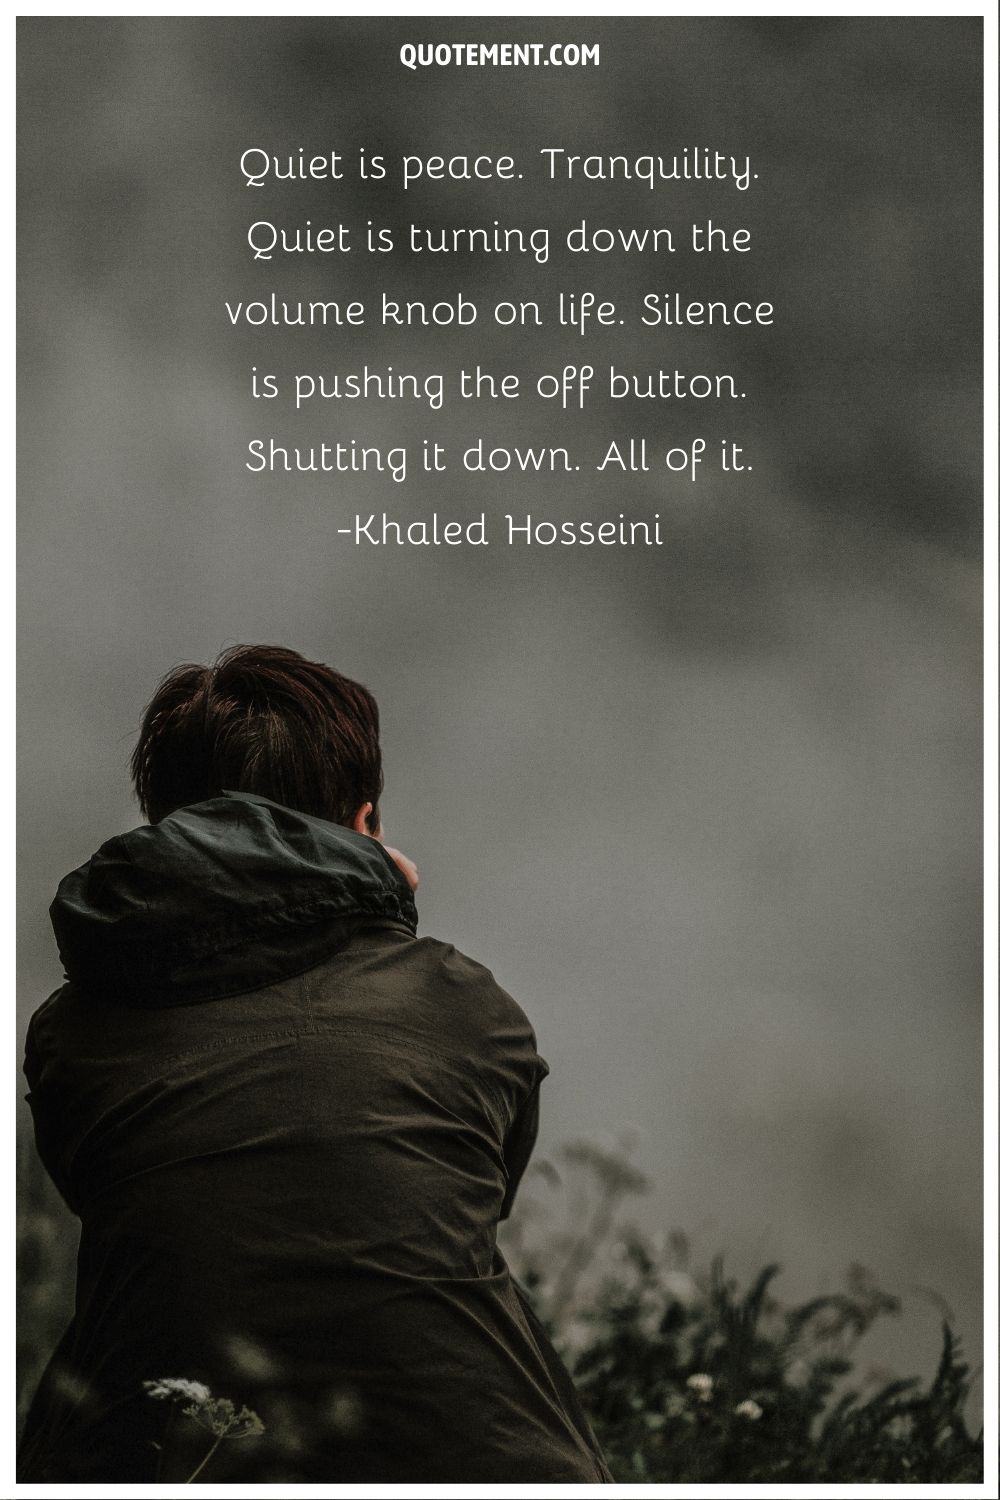 “Quiet is peace. Tranquility. Quiet is turning down the volume knob on life. Silence is pushing the off button. Shutting it down. All of it.” ― Khaled Hosseini, The Kite Runner